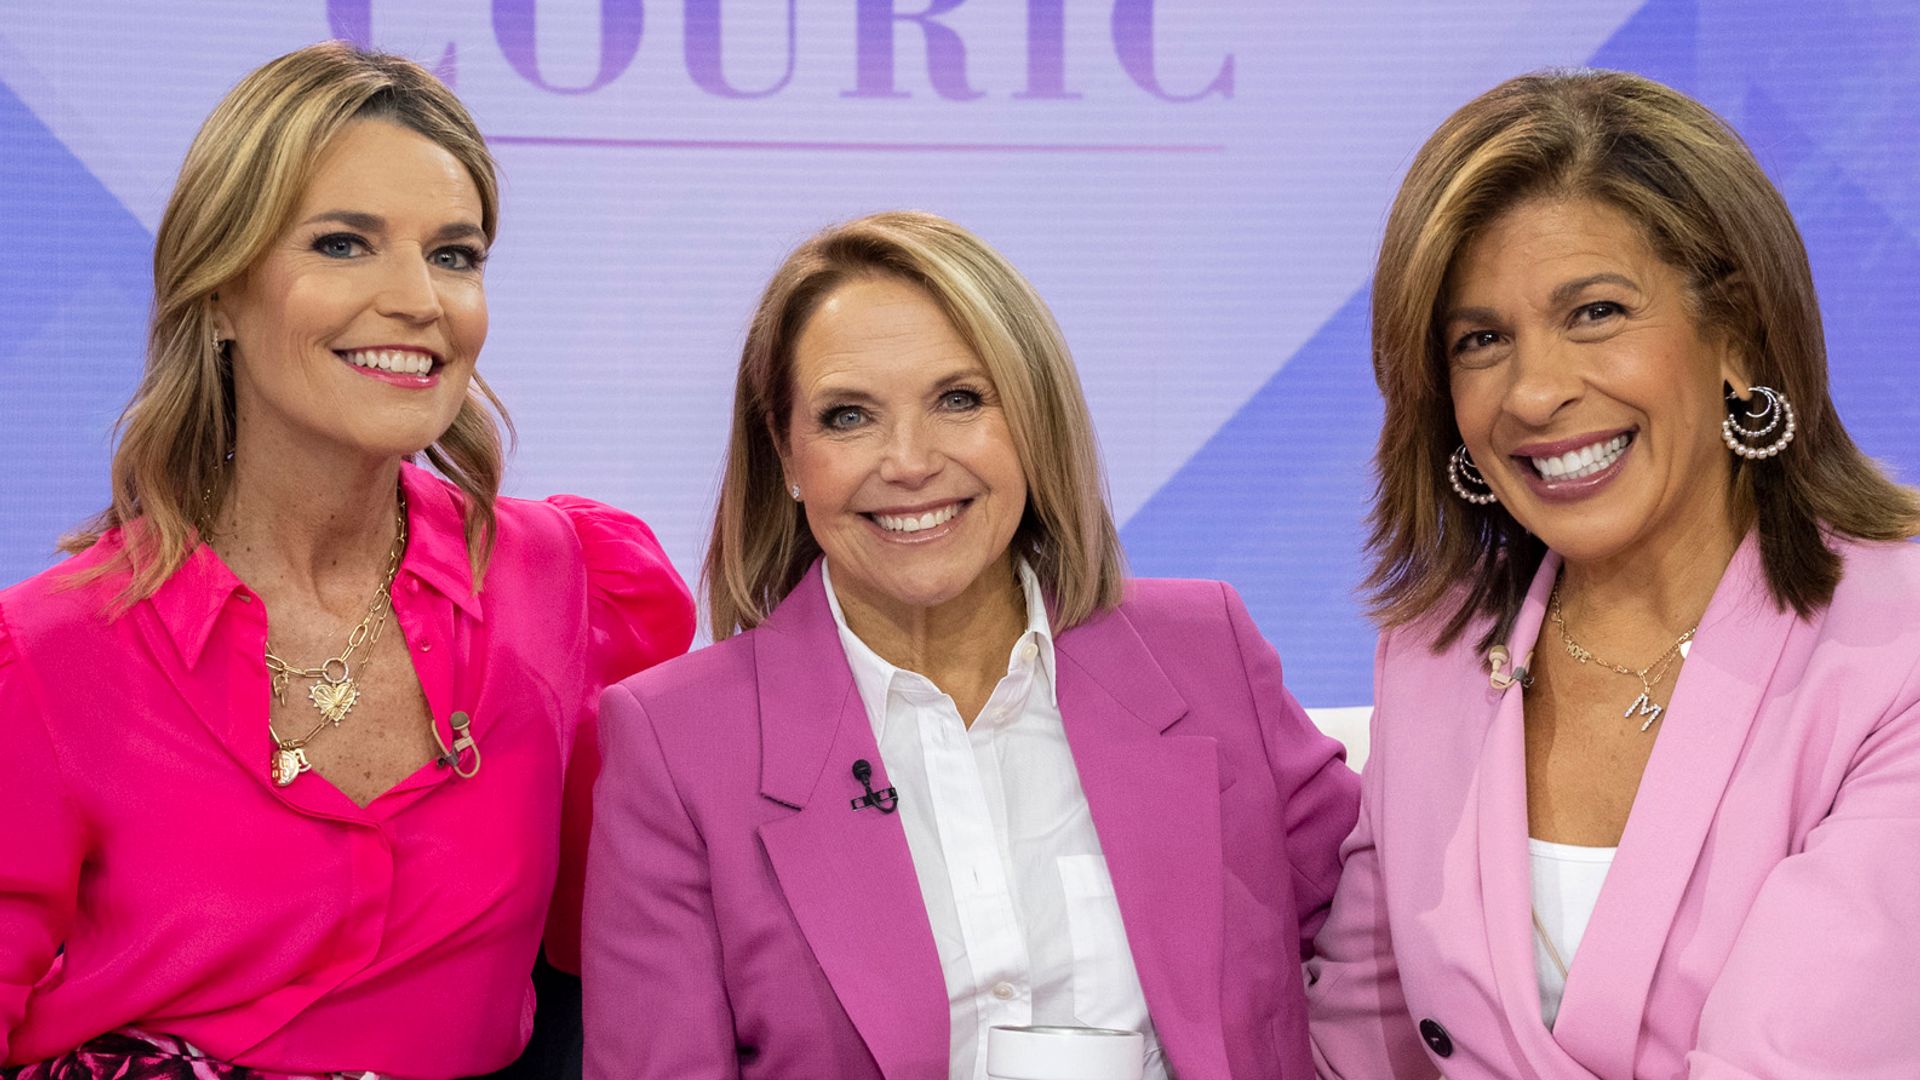 TODAY -- Pictured: Savannah Guthrie, Katie Couric and Hoda Kotb on Monday, October 3, 2022